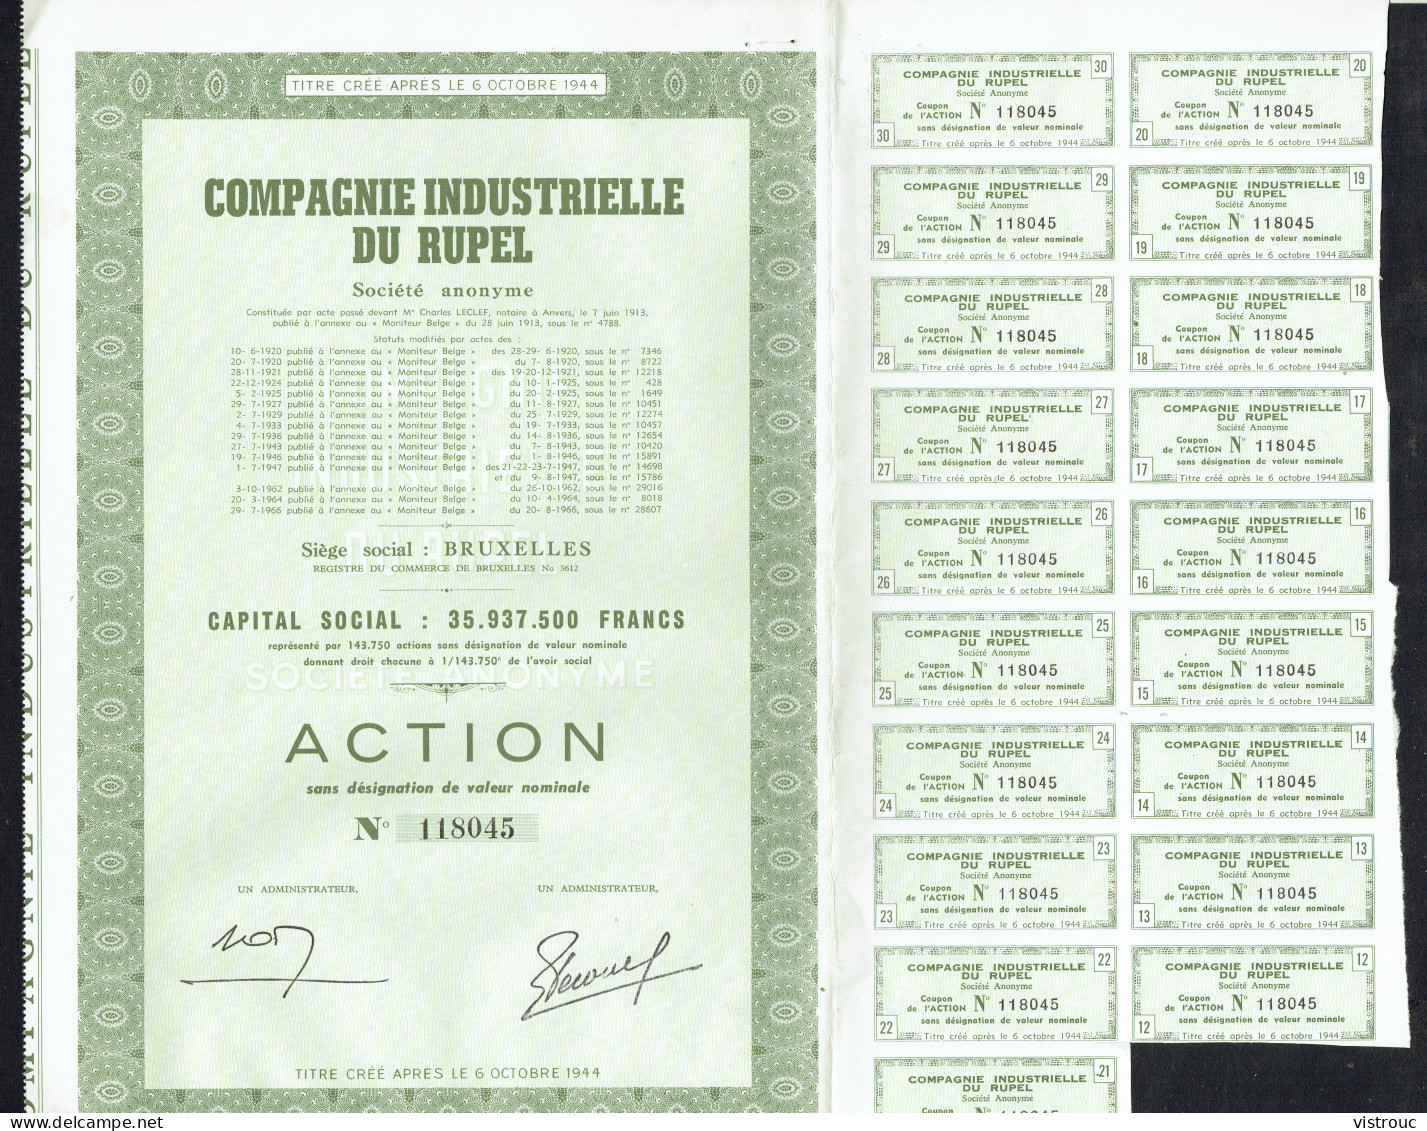 COMPAGNIE INDUSTRIELLE DU RUPEL - Action N° 118045 - BE - Boom - 1913 - CONSTRUCTION - Capital: 35.937.500 FB - Transports